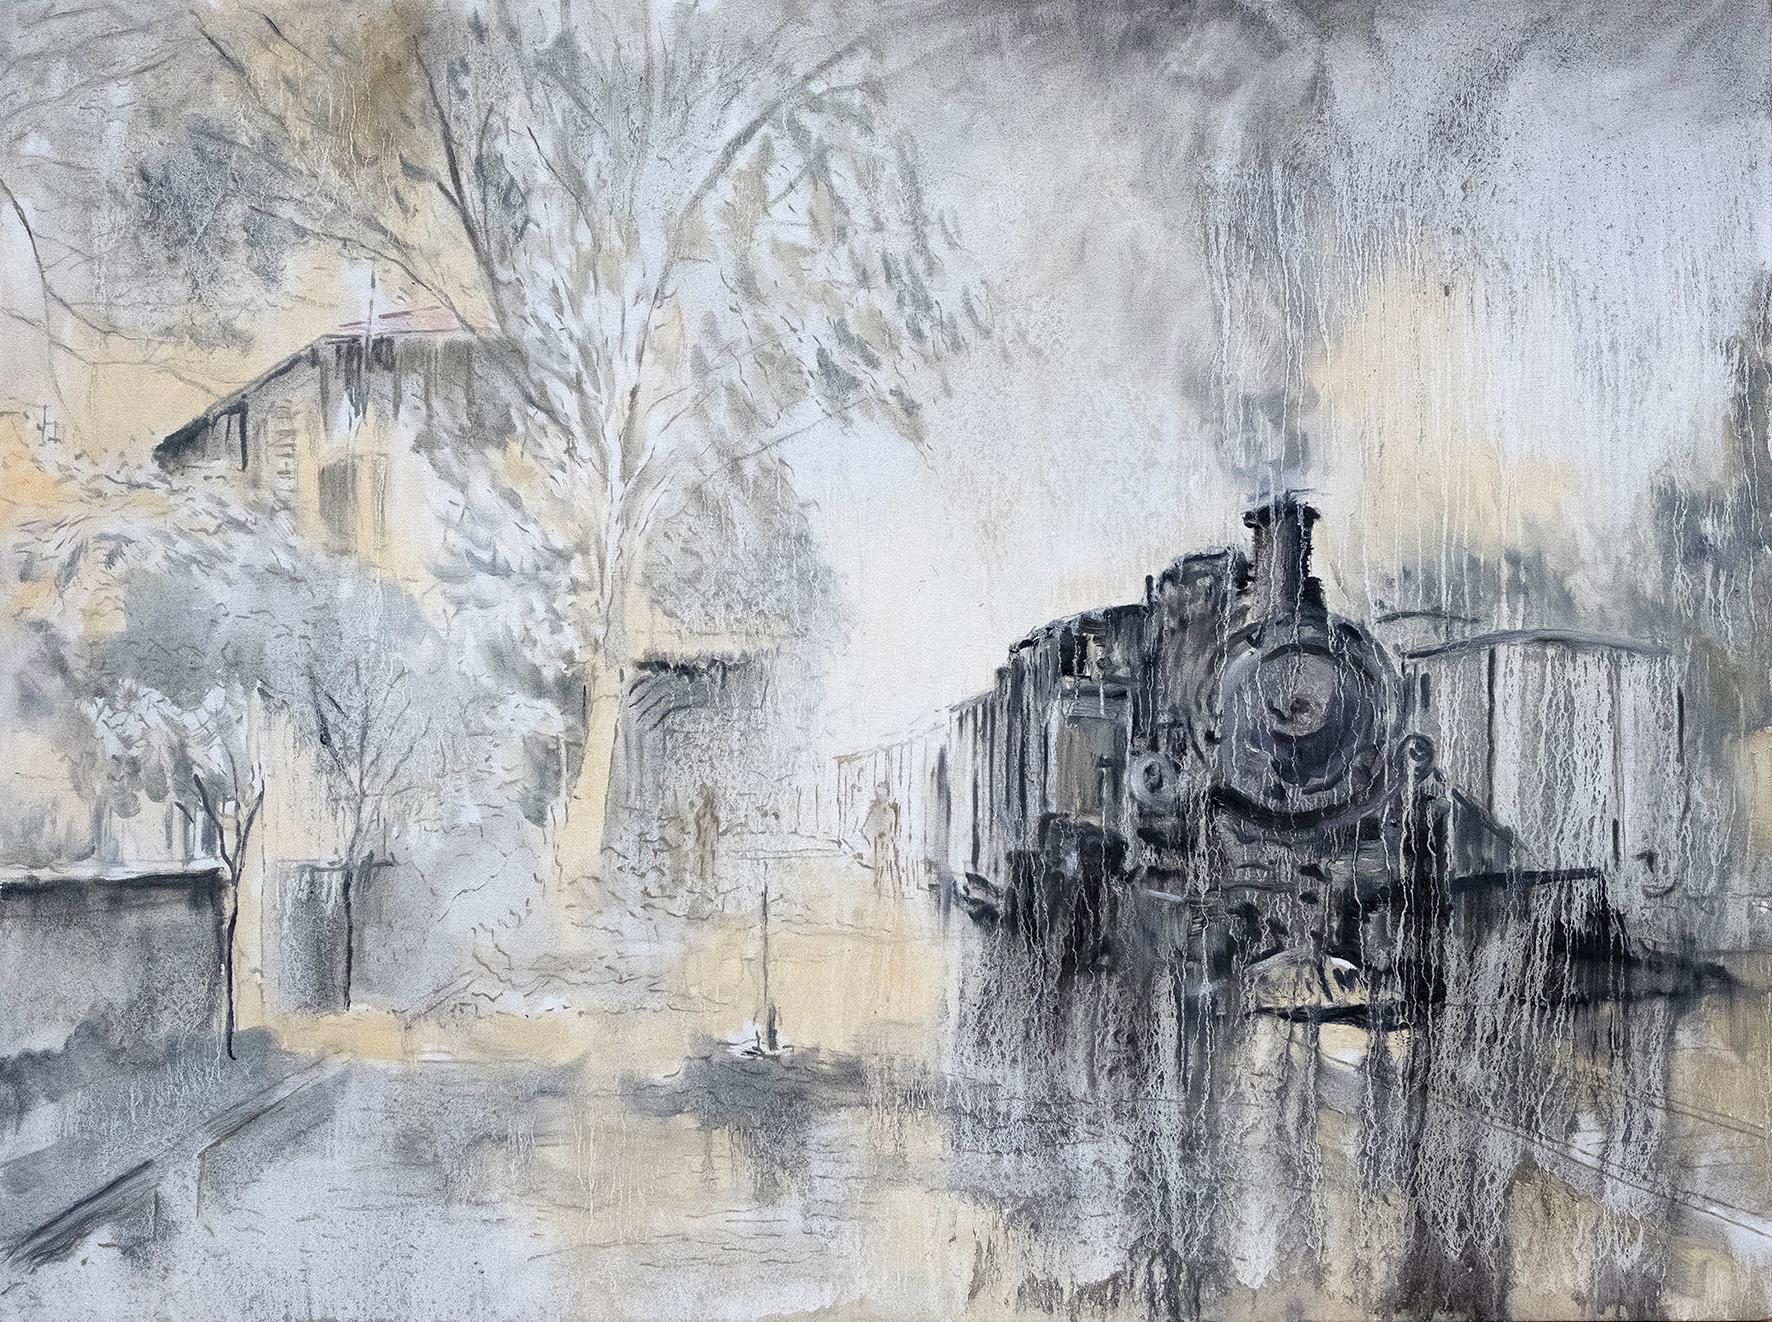 The paintings of the Mar Mikhael Station evoke a living railway, with tangible speed and smoke